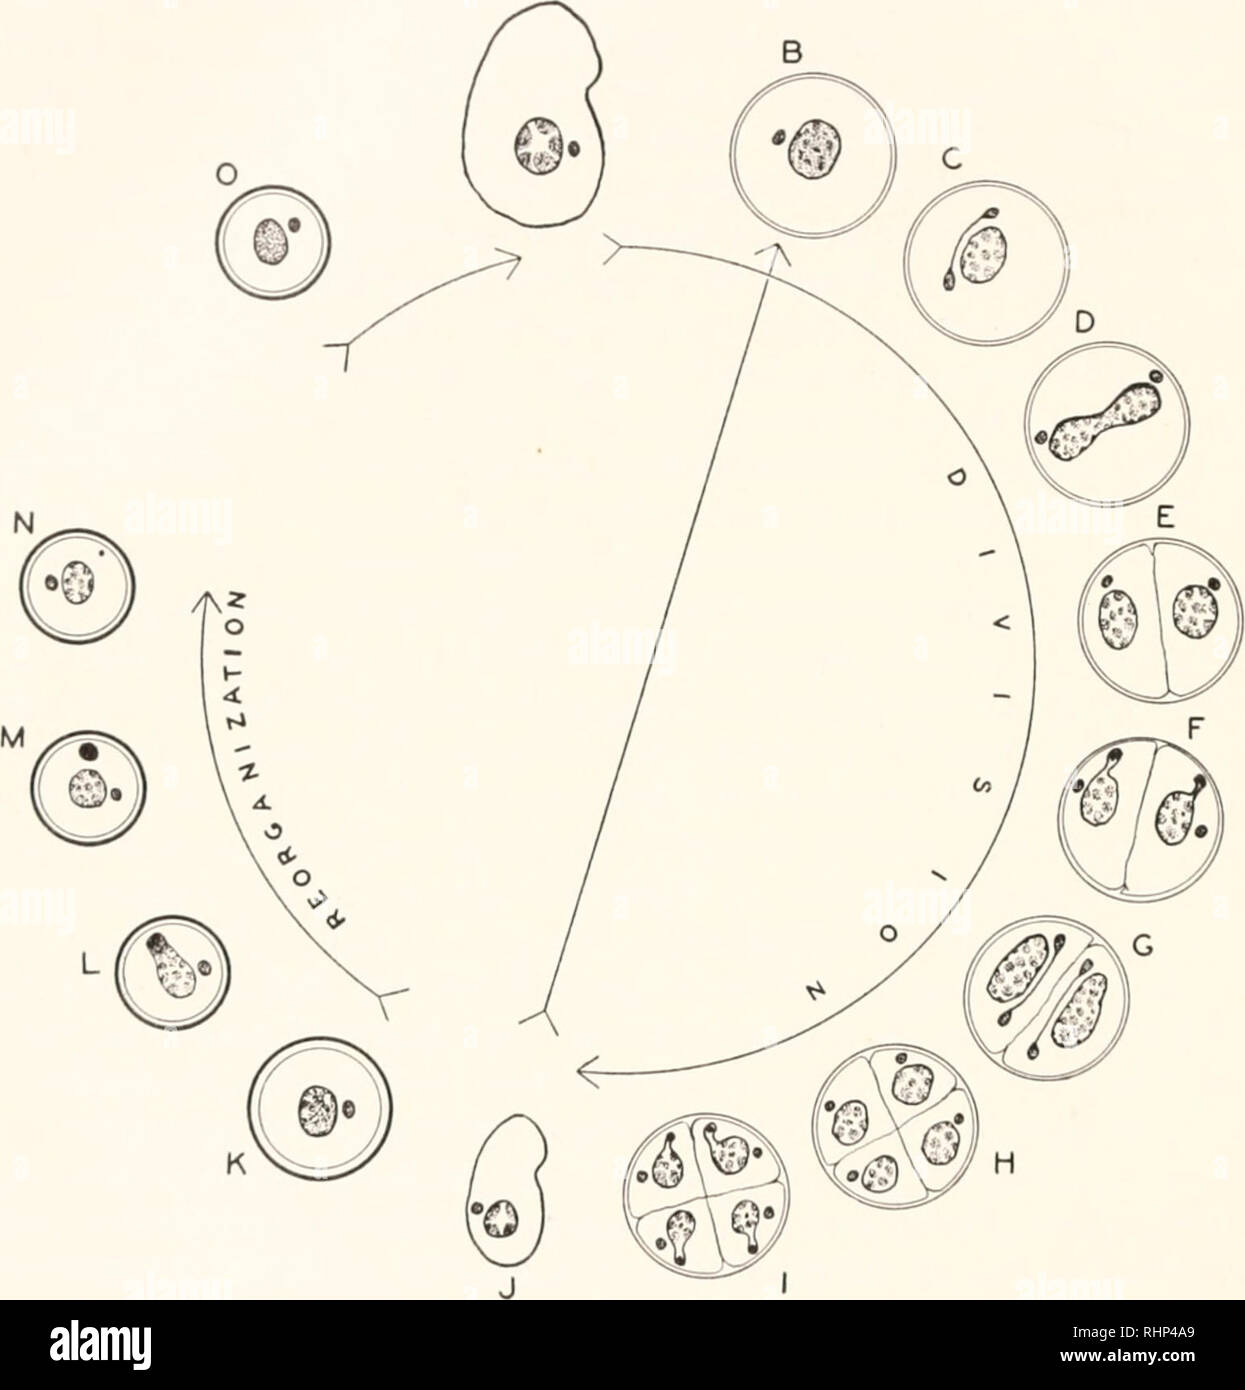 . The Biological bulletin. Biology; Zoology; Biology; Marine Biology. 184 GEORGE V. KI ODER AND C. LLOYD CLAFF or occasionally four cells, all motor organelles dedifferentiating until nothing can be seen but the nuclear apparatus and the granular cytoplasm. A B. K TEXT FIG. 1. Diagrammatic representation of the &quot;life cycle&quot; of Colpoda cuculhis illustrating the sequence of events during reproduction and resistant cyst formation. A-J, normal reproductive activity repeated (/ to B) under favorable cultural conditions. K-O, resistant cyst with space between N and () representing the lap Stock Photo